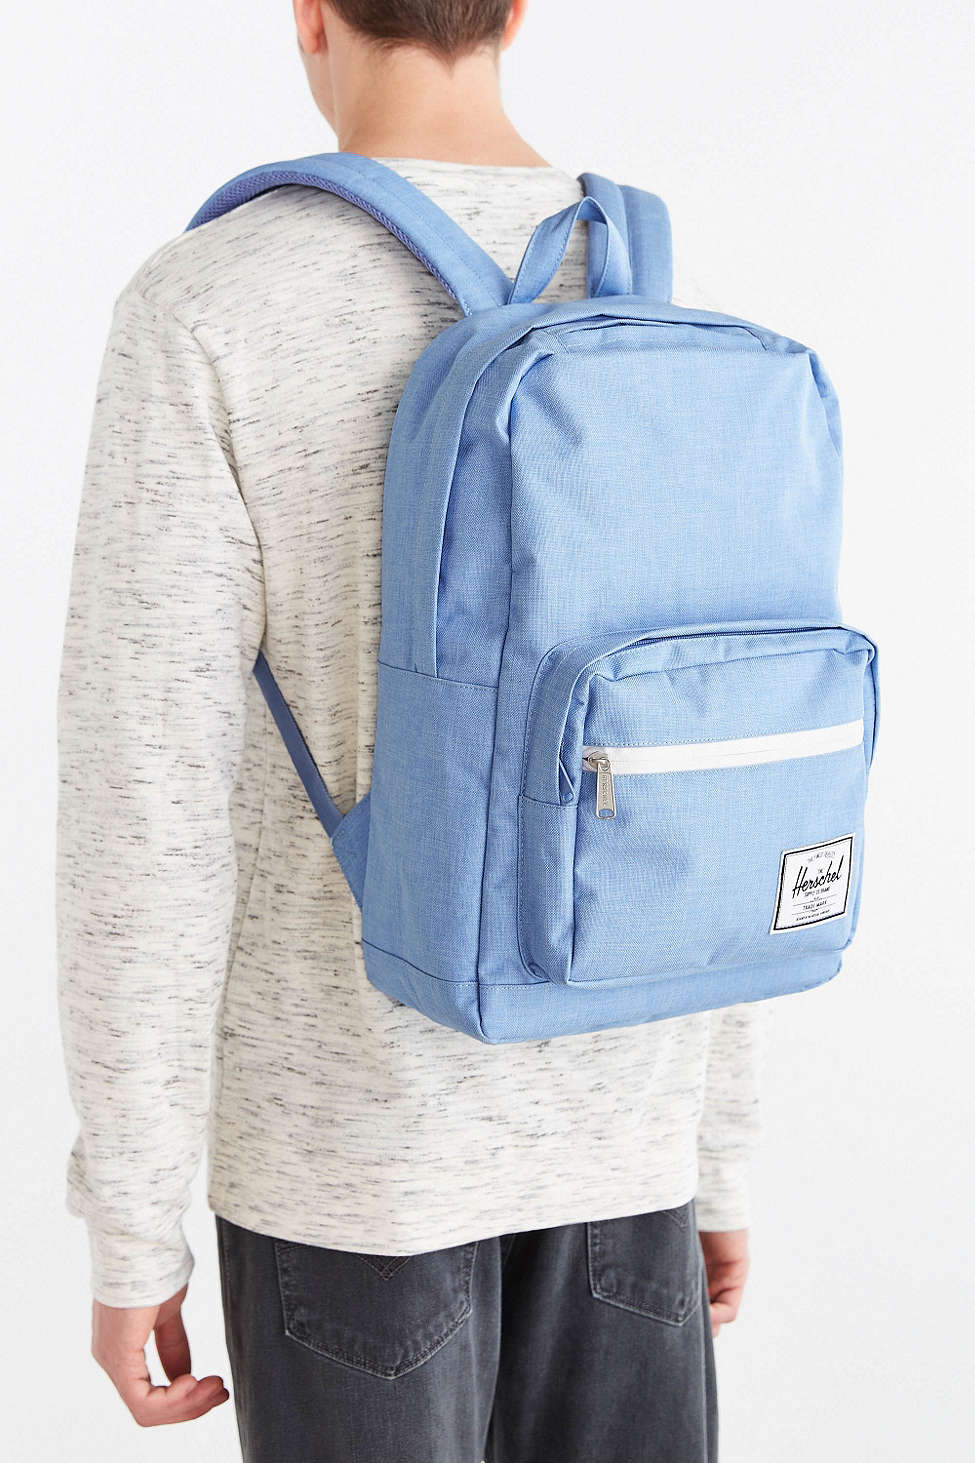 Herschel Supply Co. Pop Quiz Chambray Backpack - Urban Outfitters